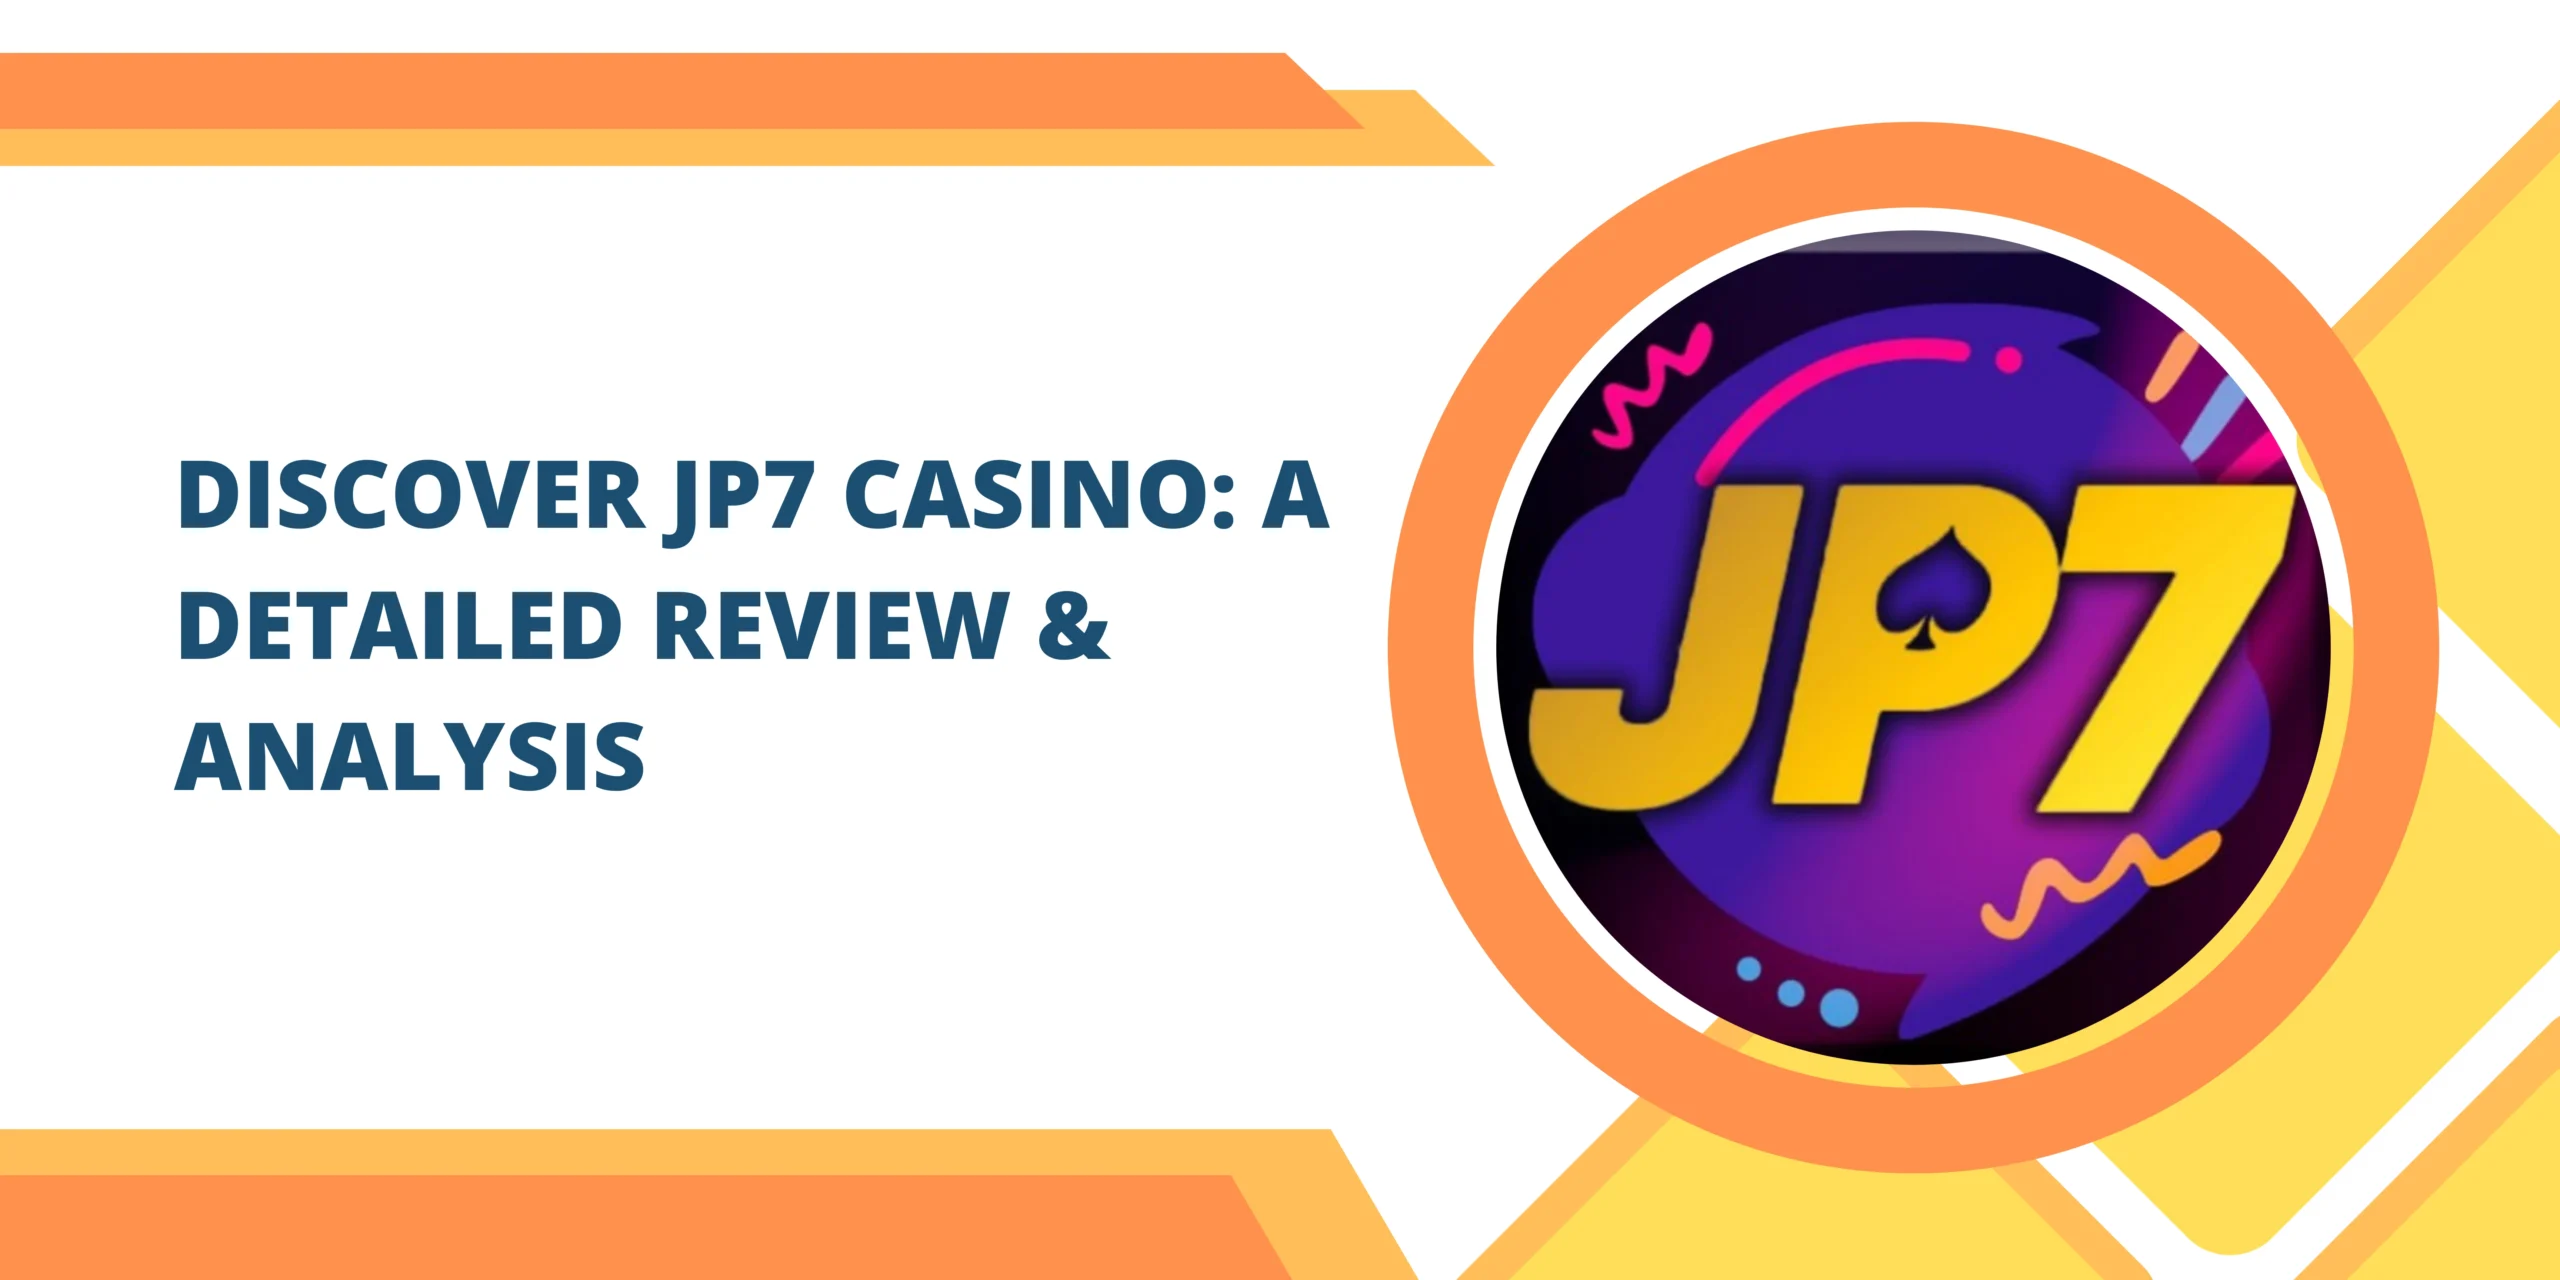 Discover JP7 Casino: A Detailed Review & Analysis